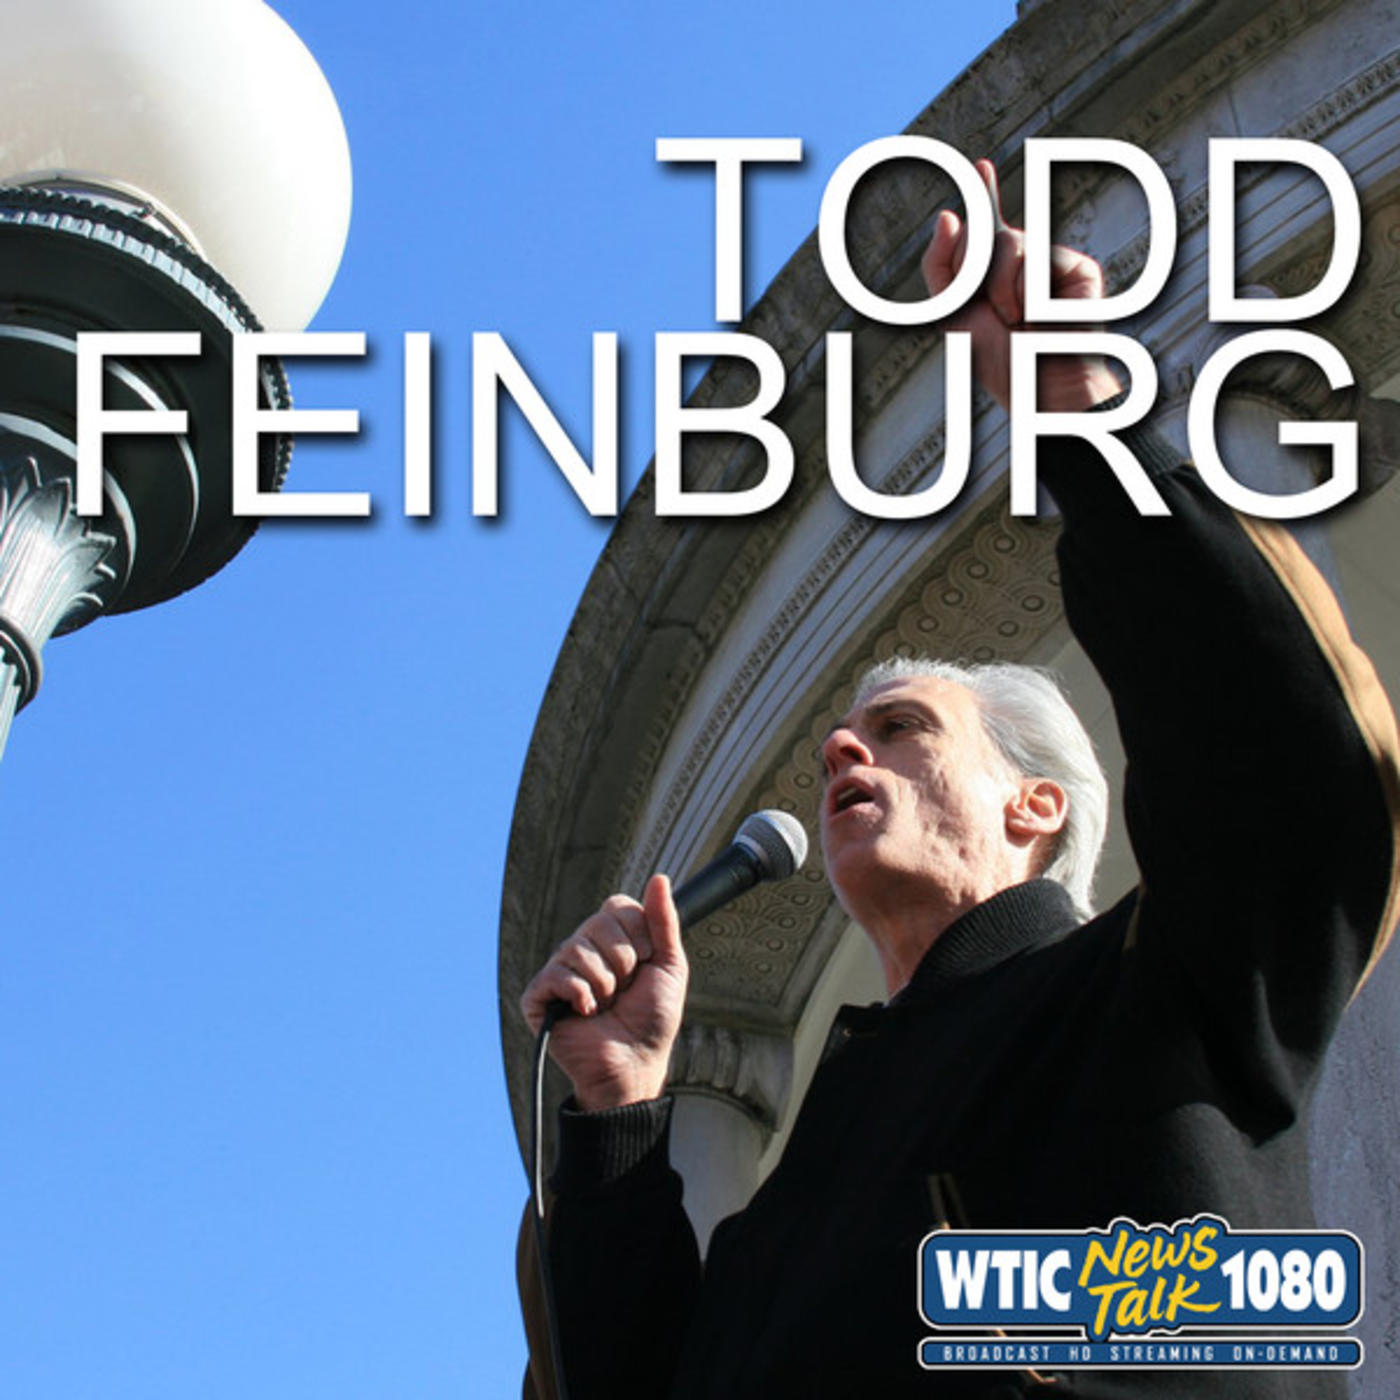 Todd Feinburg: Another Special Saturday COVID Show (04/11/20)